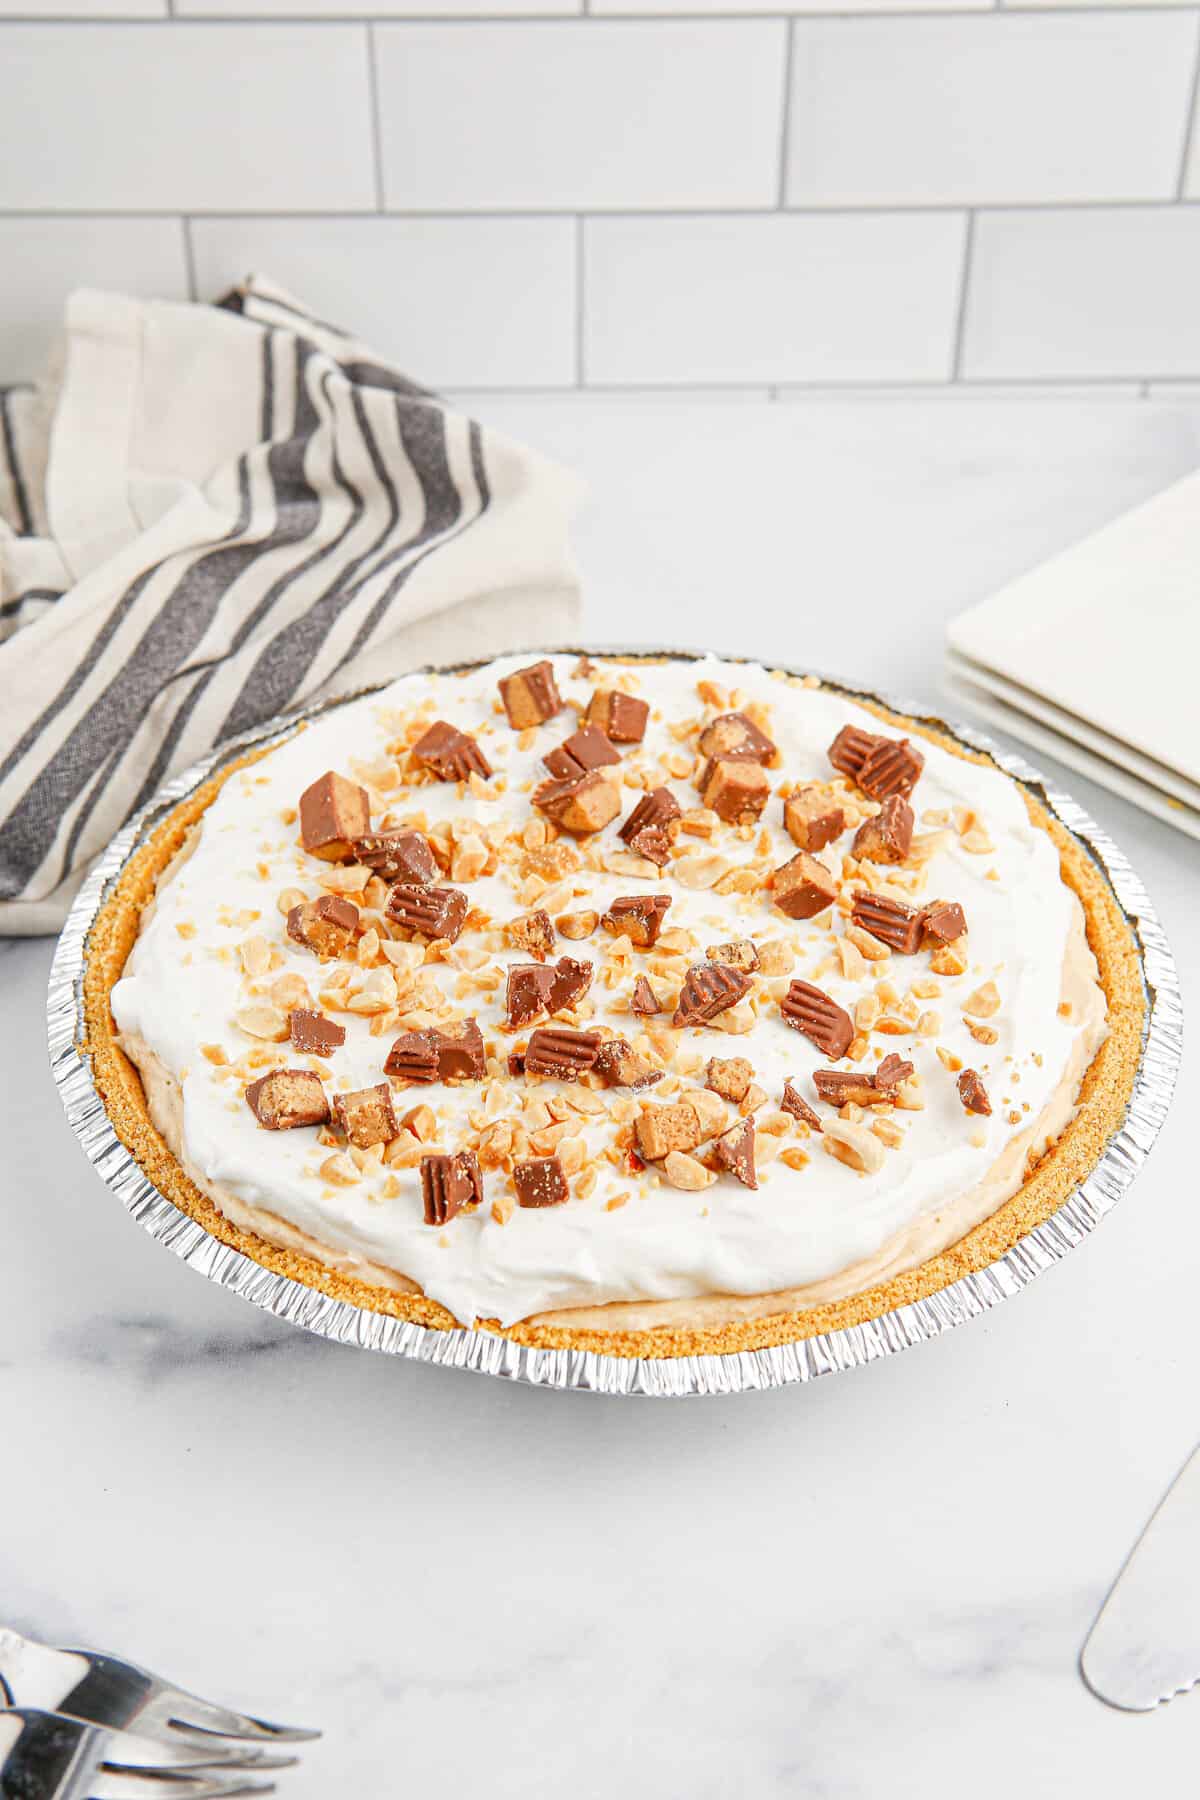 No bake peanut butter pie topped with whipped topping, reese's peanut butter cups, and peanuts.